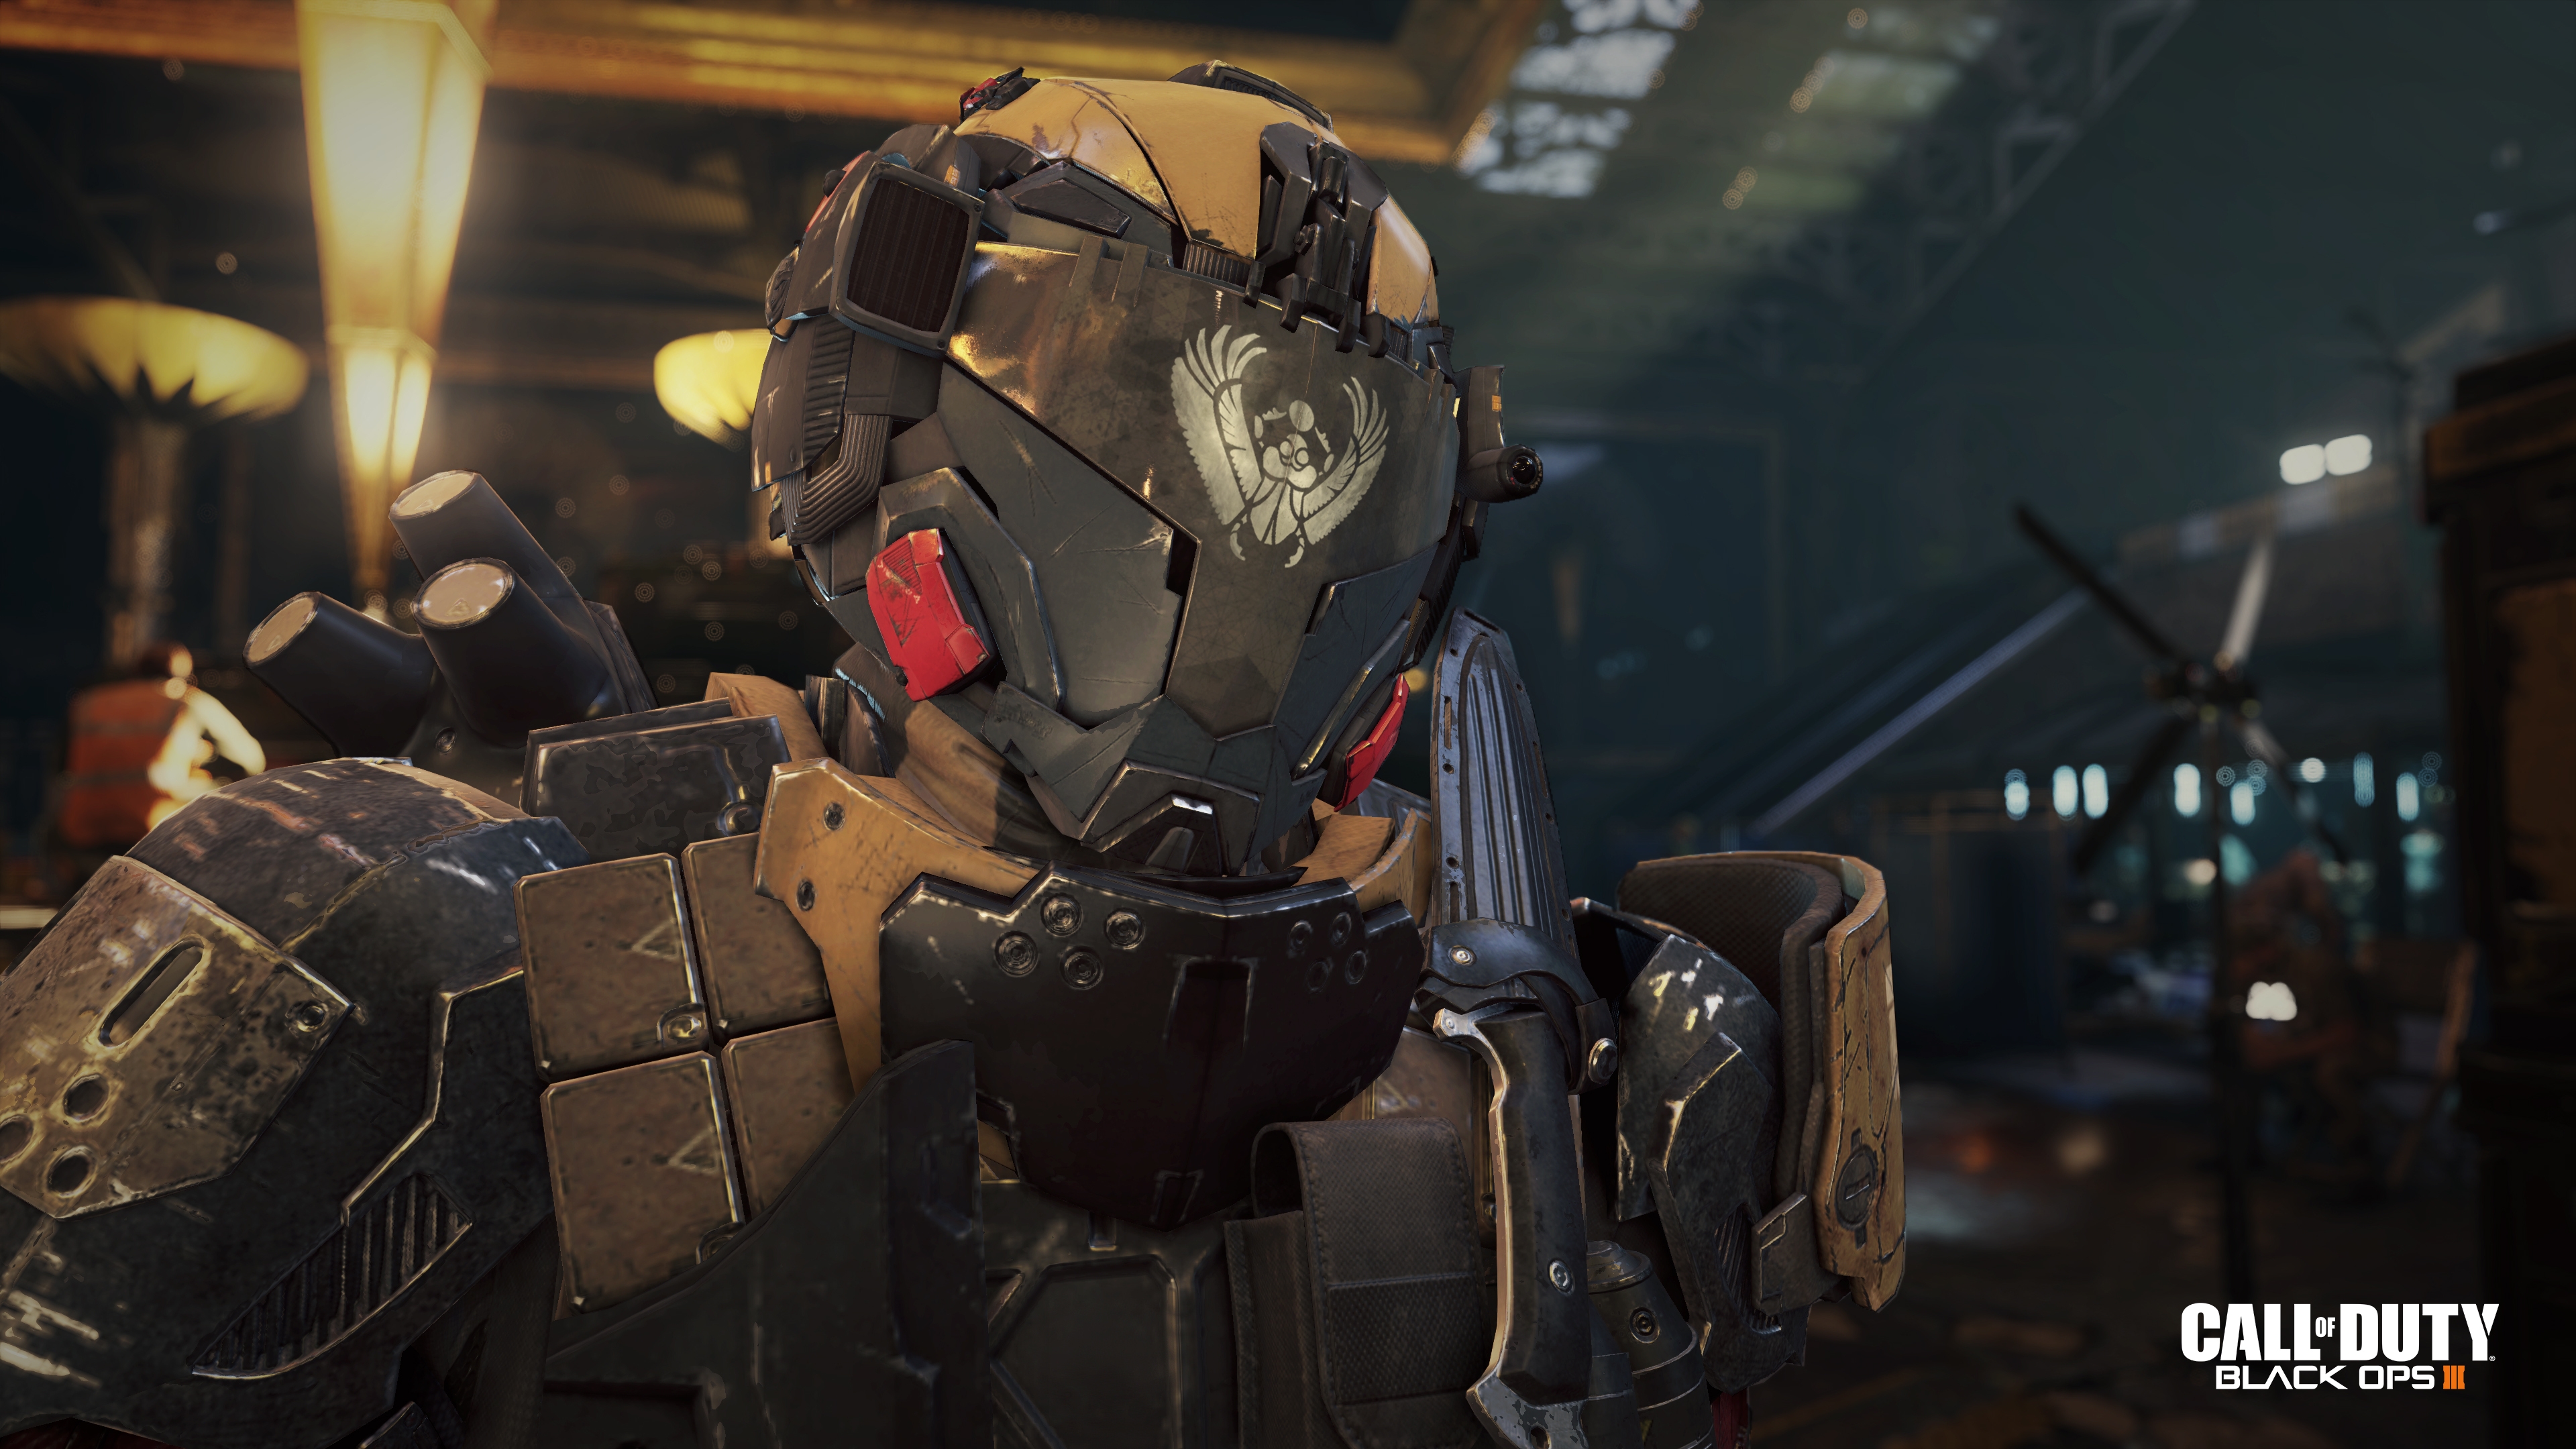 Call of Duty Black Ops 3 Ramses Station Armored Guard for 3840 x 2160 Ultra HD resolution